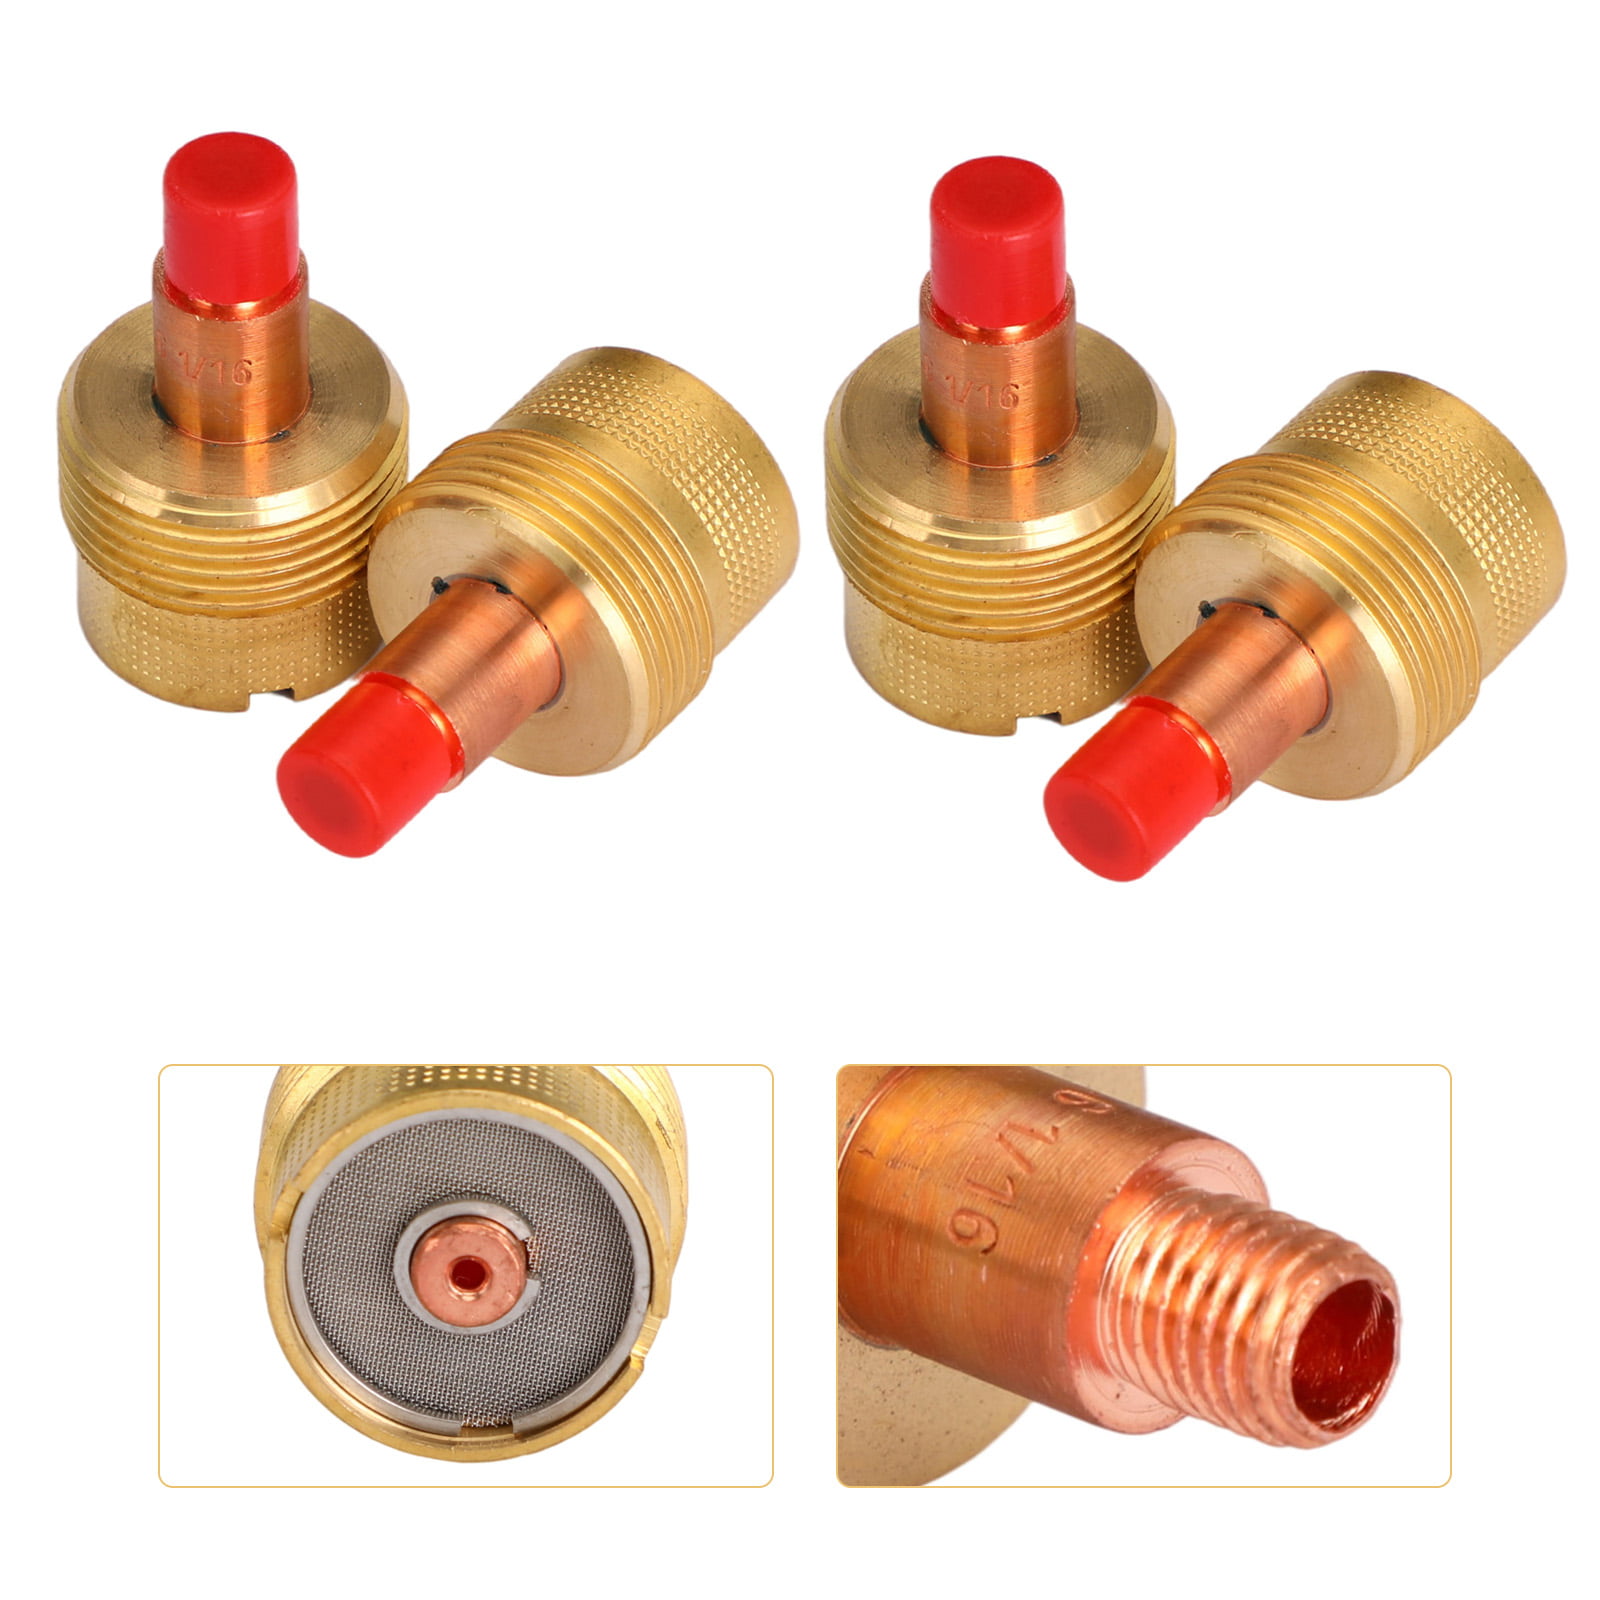 Collet Body WP-9 TIG Argon Arc Welding Torch Brass Collet Body TIG Welding Torches Kit Collet Body Nozzle Consumables Kit Fit Electronic Soldering Welding Accessories 1.6mm&1/16 